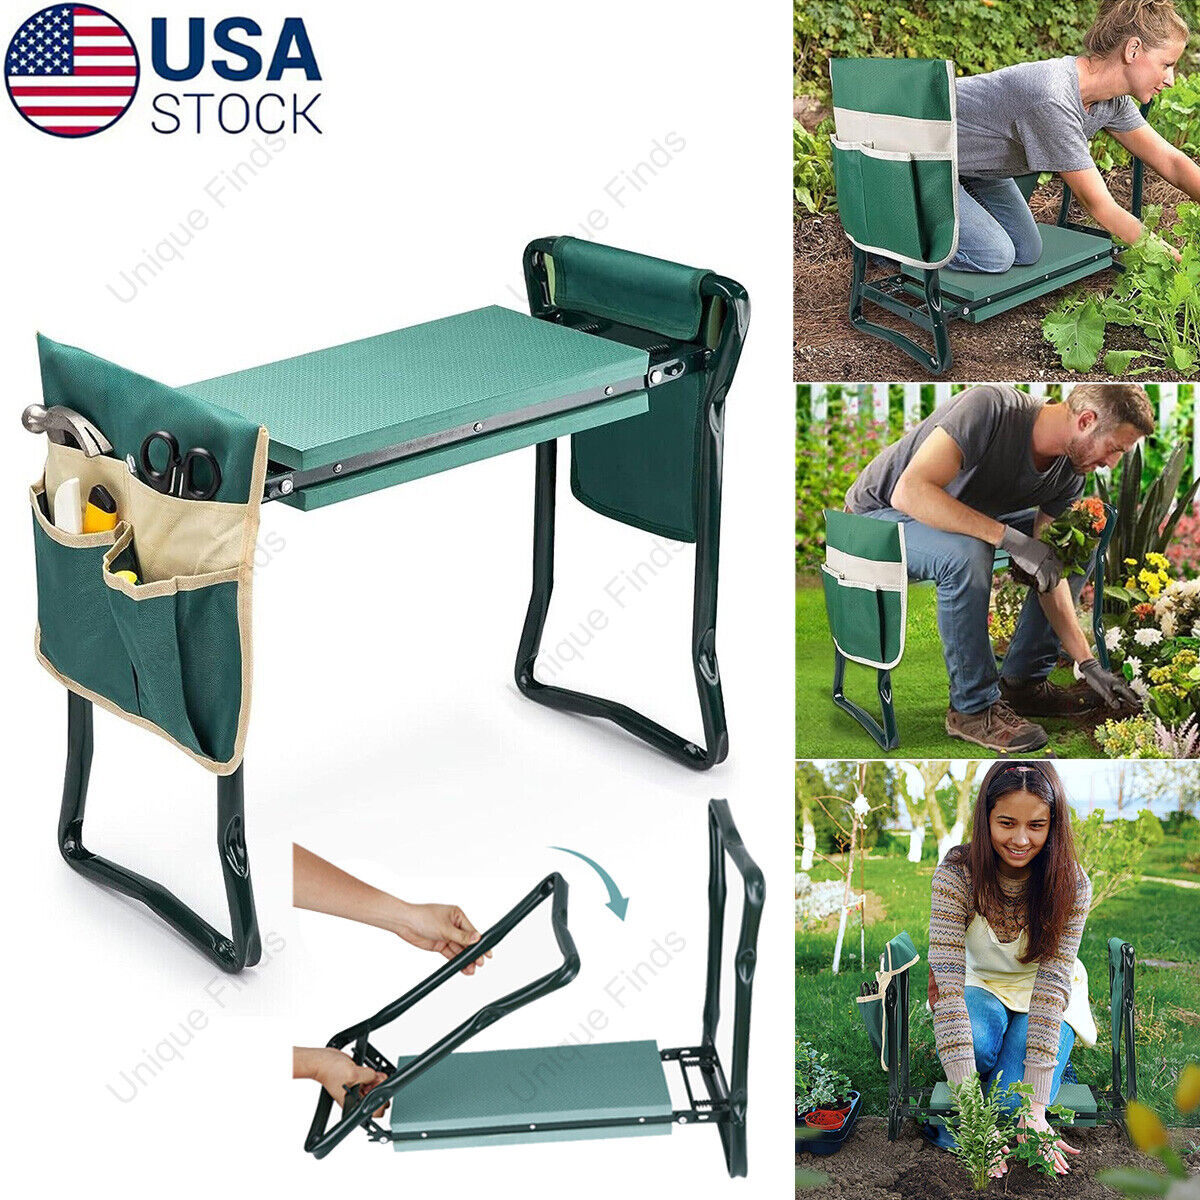 Folded Garden Kneeler Bench Kneeling Soft Eva Pad Seat With Stool Pouch Portable